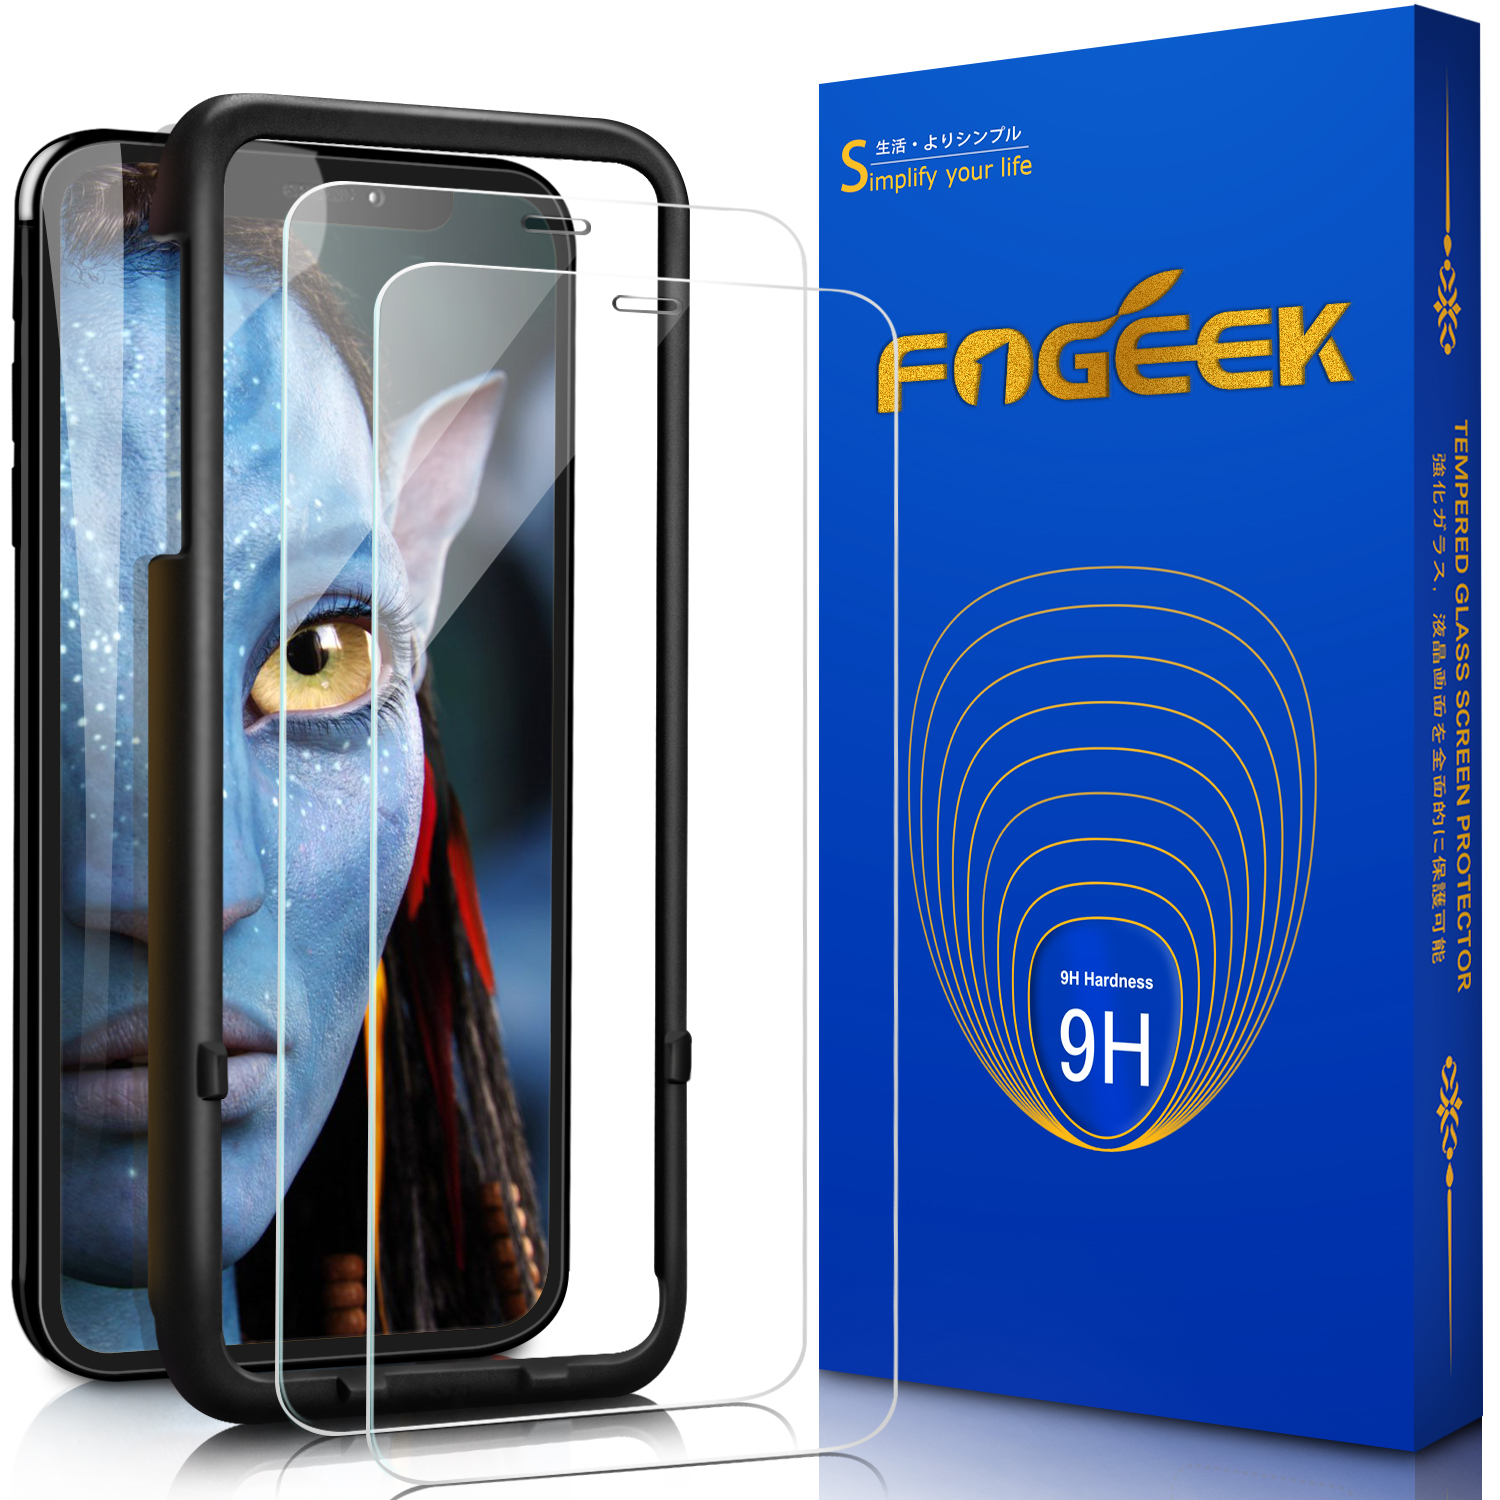 FOGEEK iPhone XS MAX Screen Protector, 0.33mm 9H Tempered Glass for iPhone Xs Max, Anti-Fingerprint & Scratch Resistant,UPC:707409695423